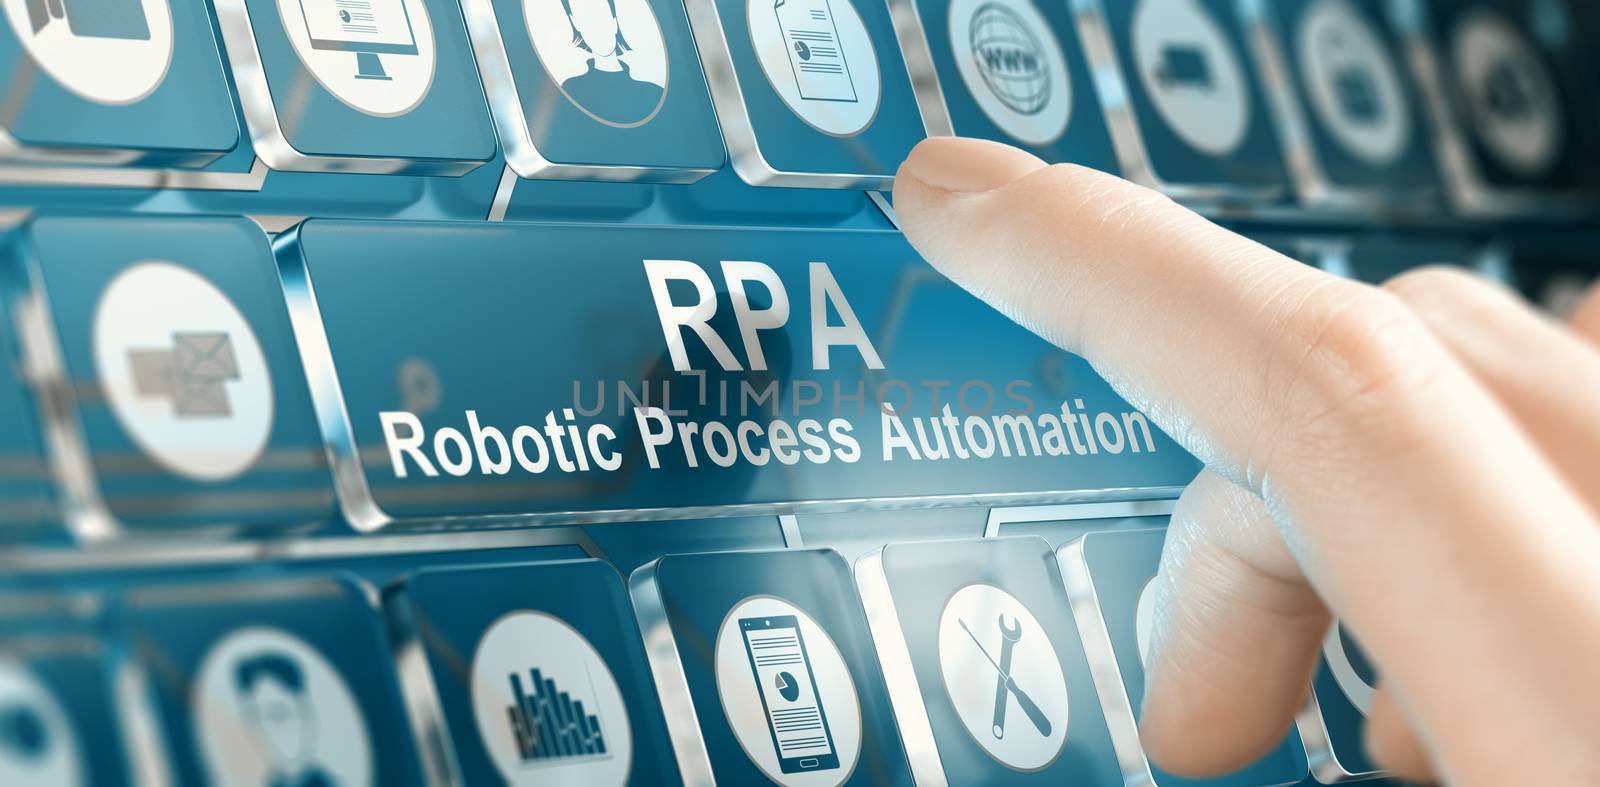 RPA, Robotic Process Automation Concept by Olivier-Le-Moal